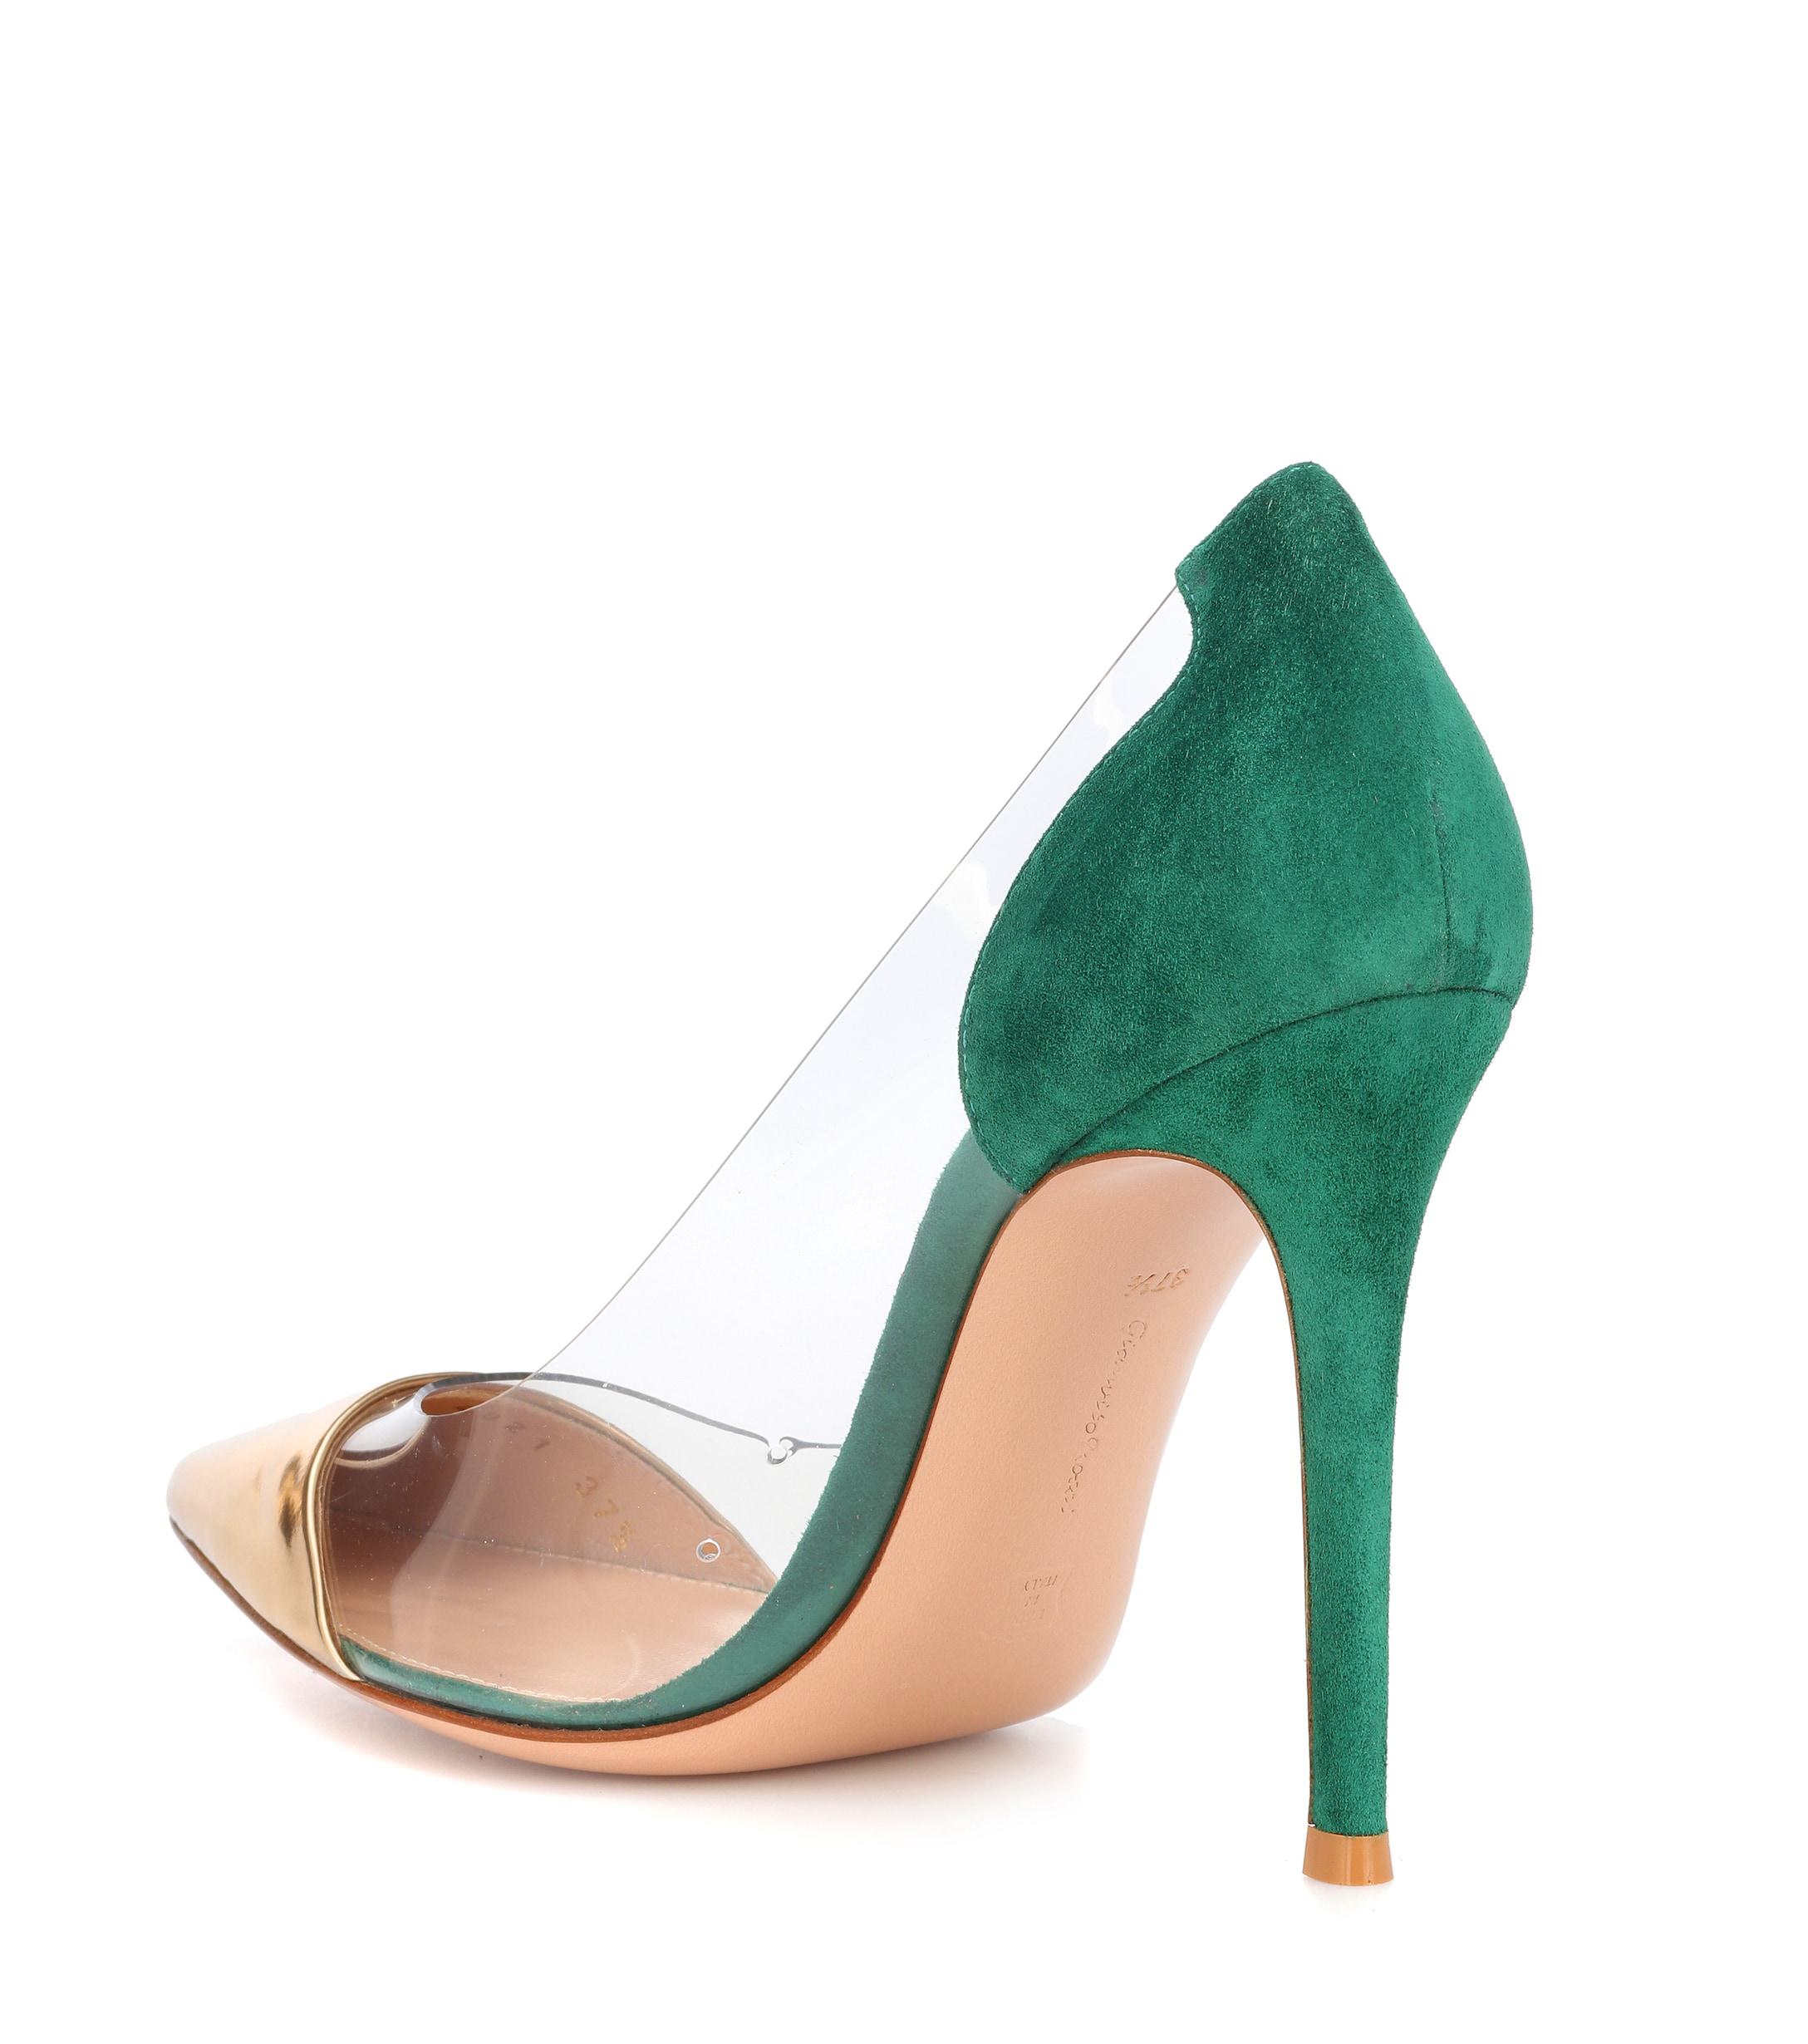 Gianvito Rossi Plexi 105 Leather And Suede Pumps in Green | Lyst